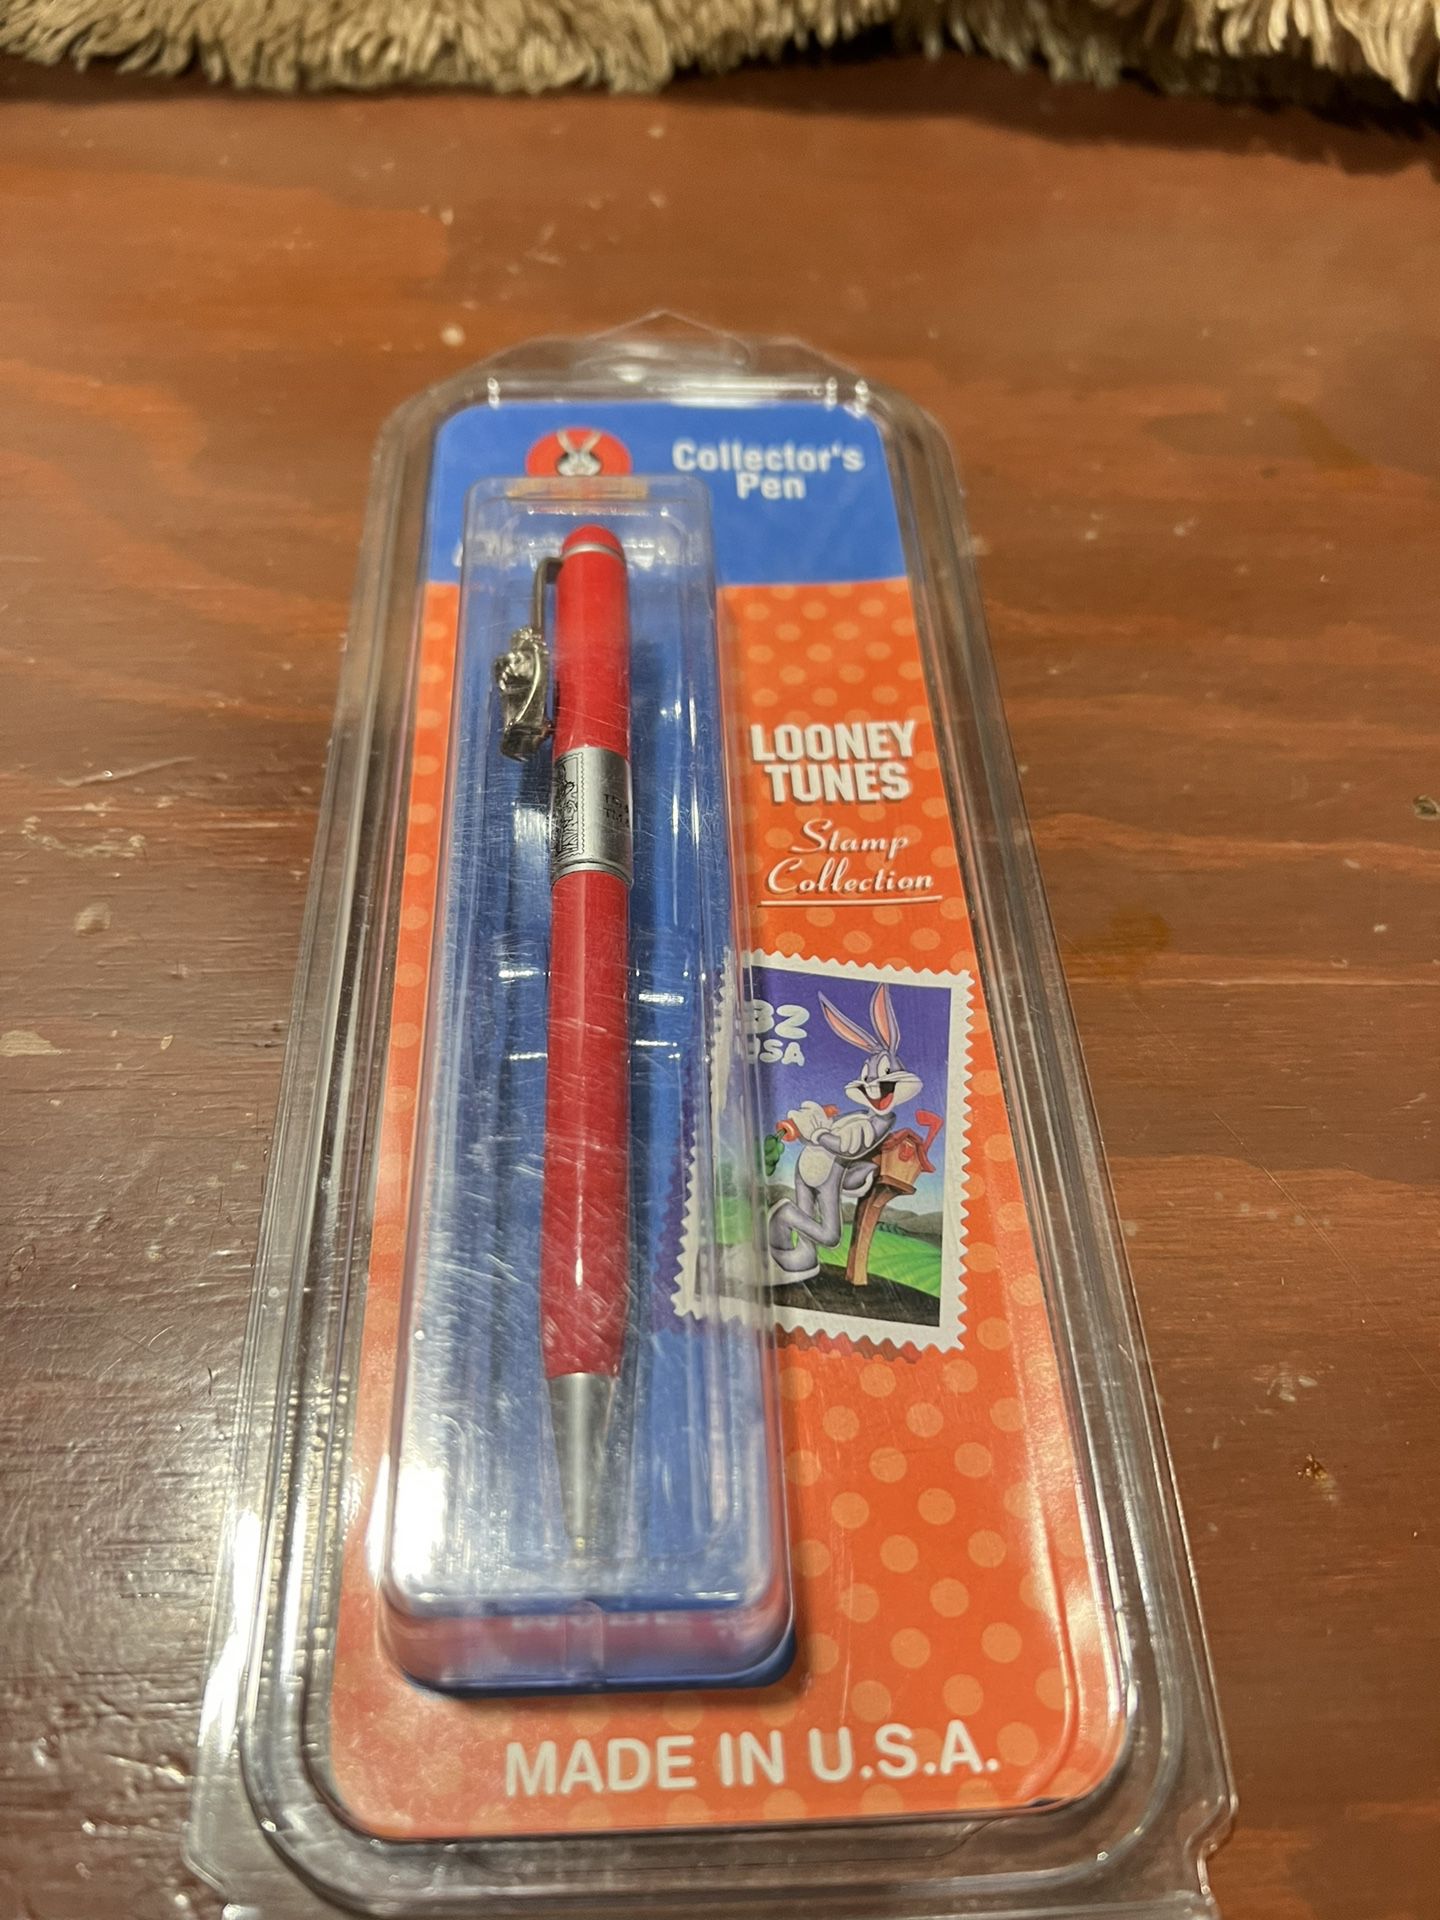 Vintage Looney tunes USPS stamp collection collector's pen